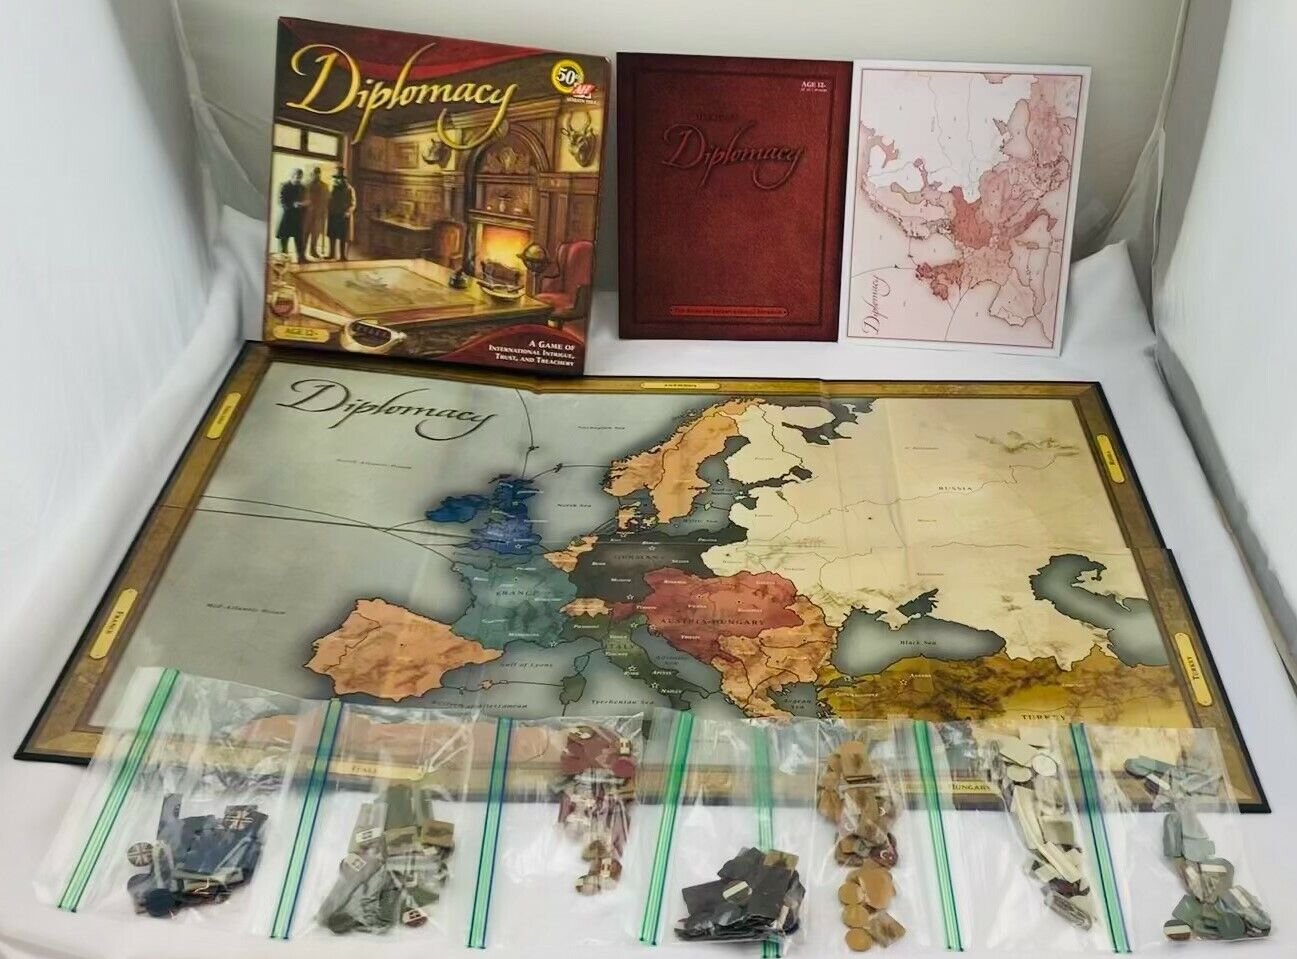 2008 Diplomacy Game 50th Anniversary Game by Avalon Hill Complete in Great Cond